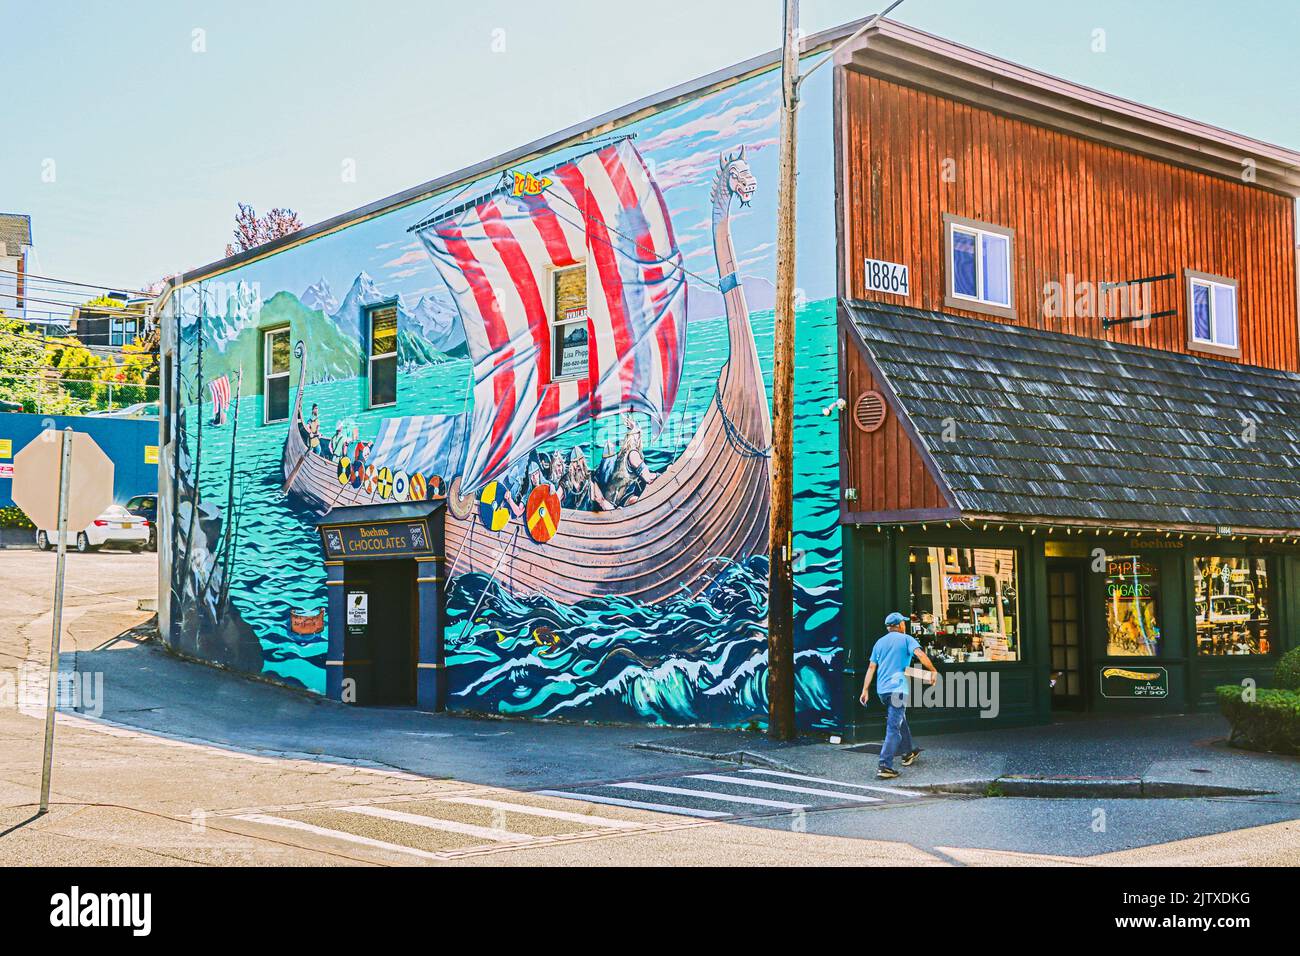 Mural in Poulsbo (known as Little Norway) Washington showing Vikings on a Longship. The mural was painted by James R, Mayo in 2011 on Boehm's Stock Photo